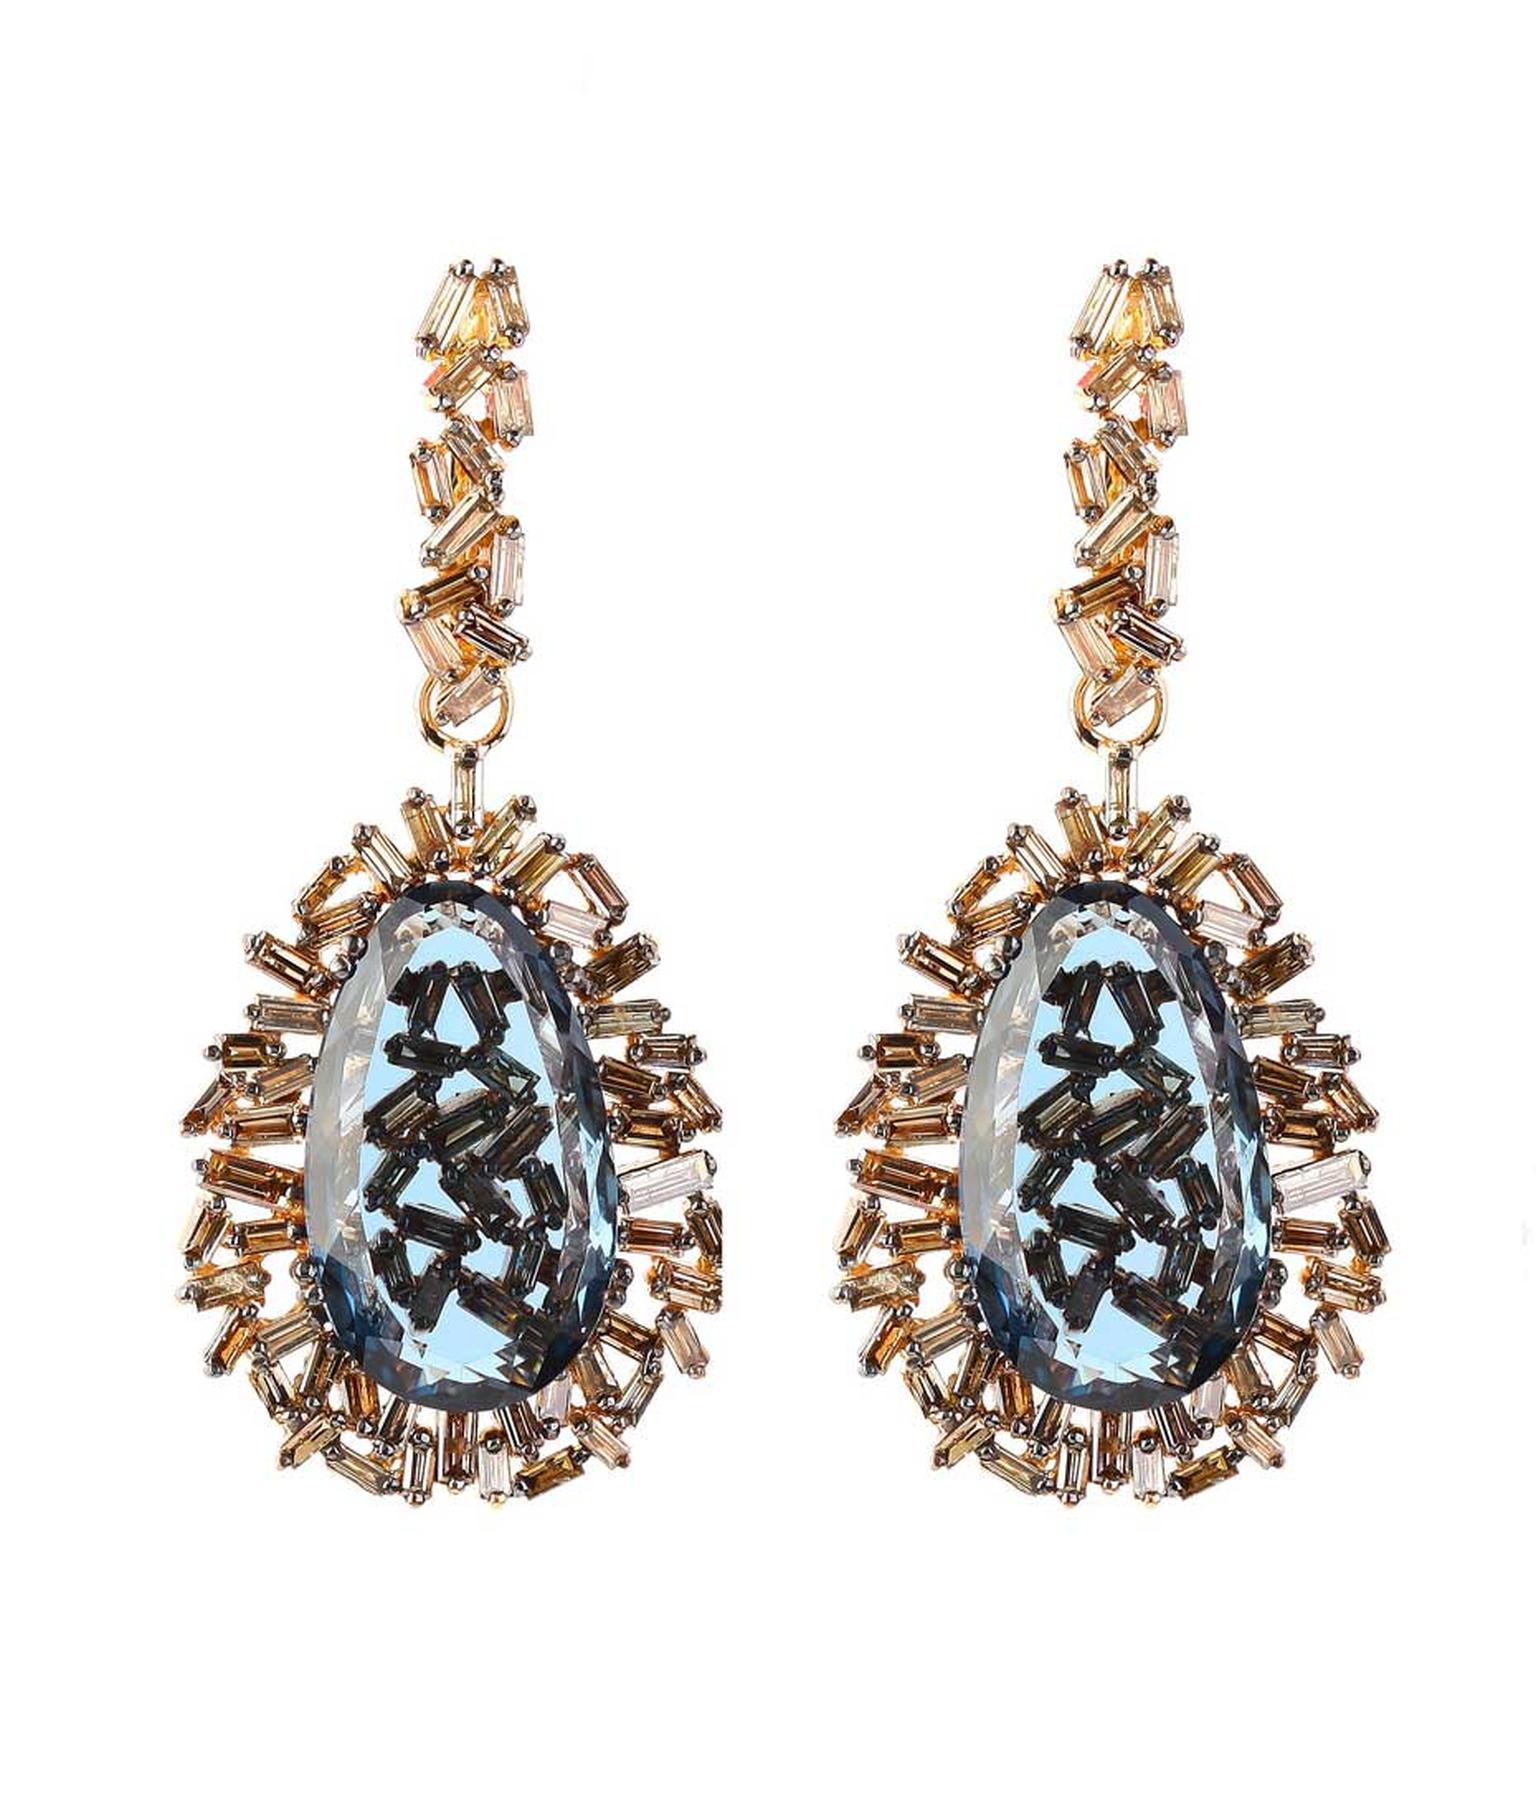 Suzanne Kalan rose gold Vitrine earrings with champagne